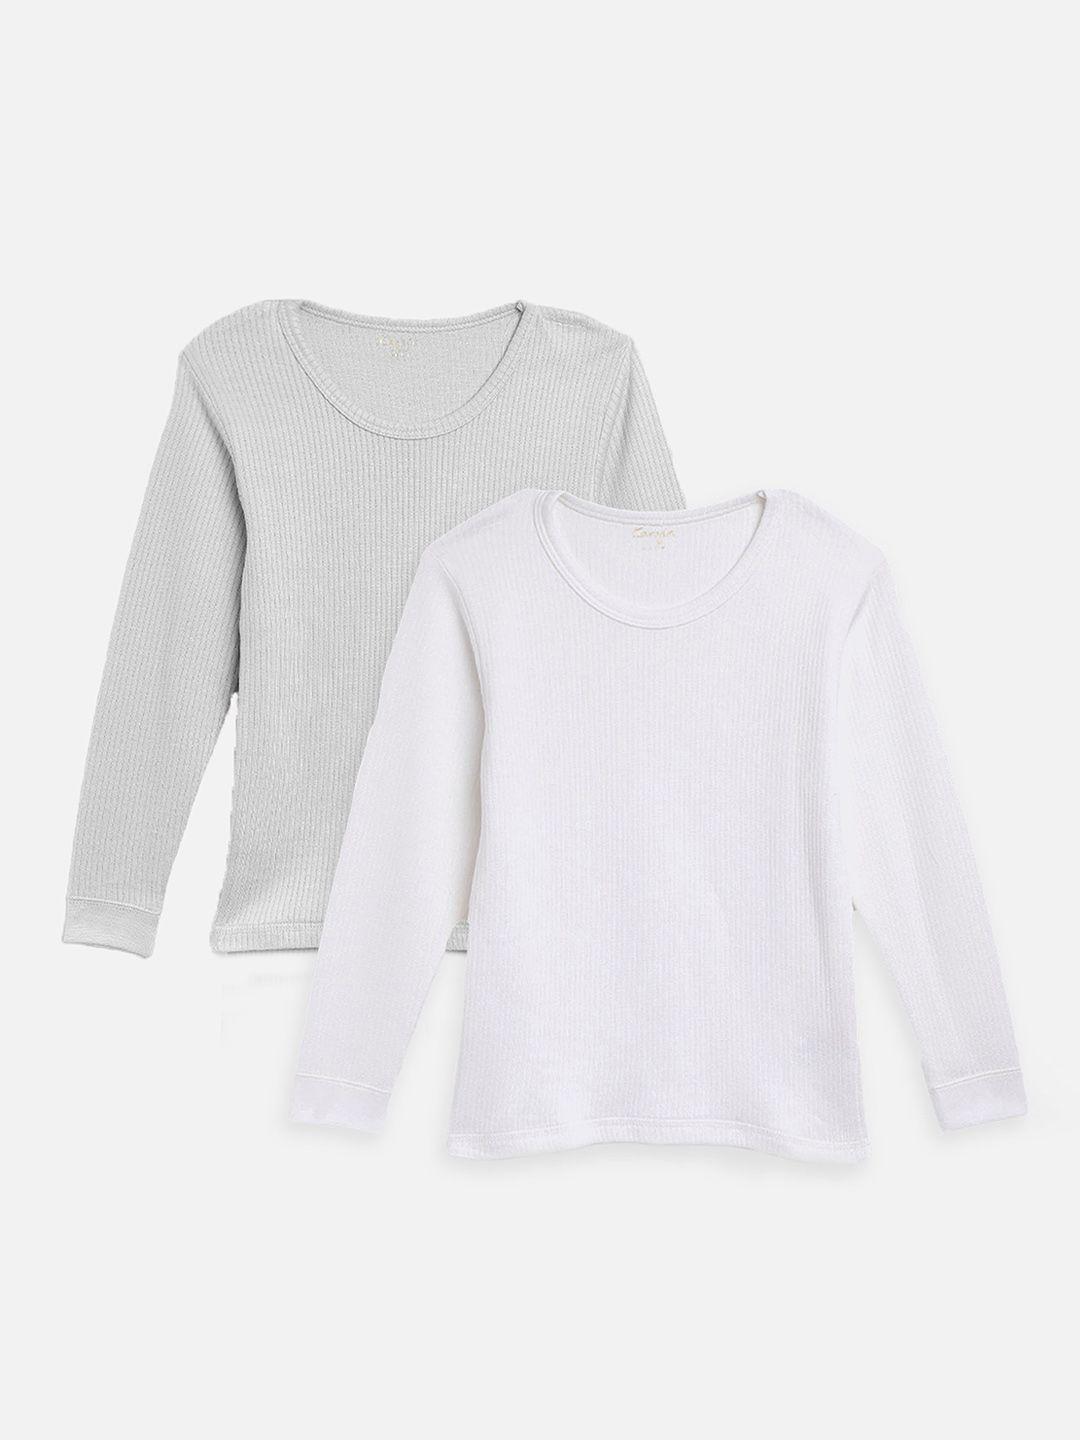 kanvin boys grey & white pack of 2 solid thermal tops